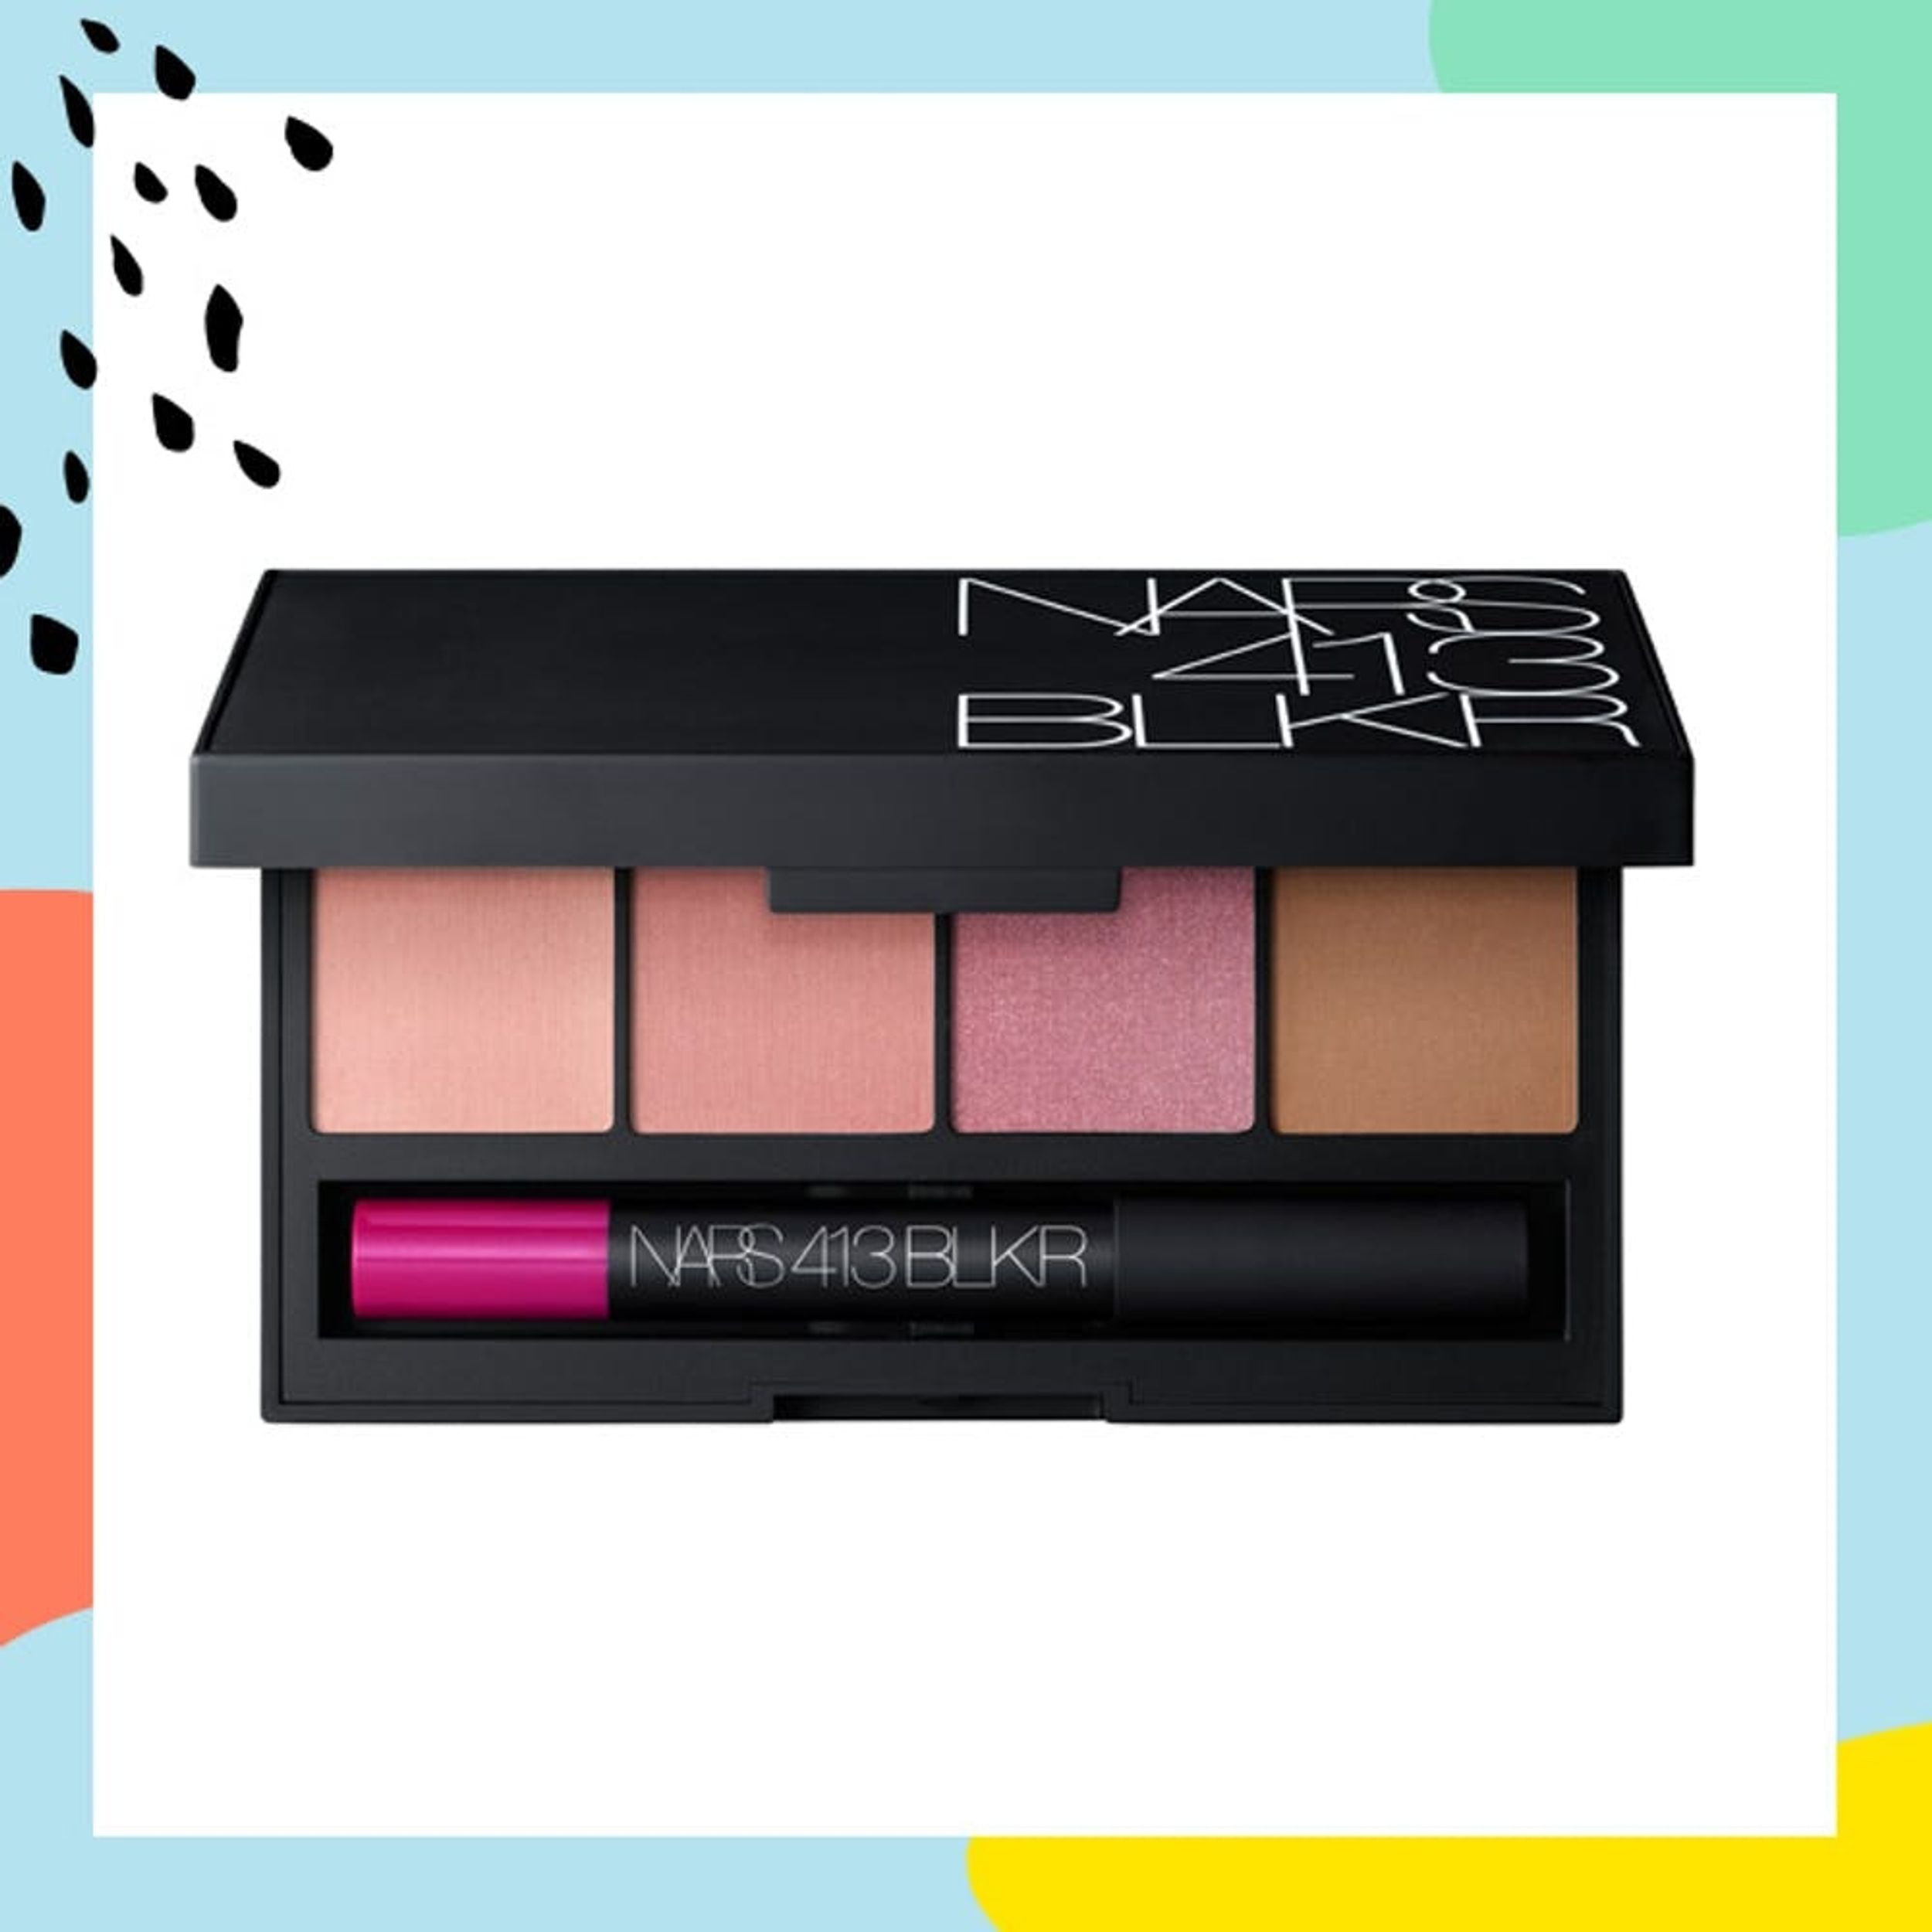 10 New Beauty Products to Try This Month - Brit + Co